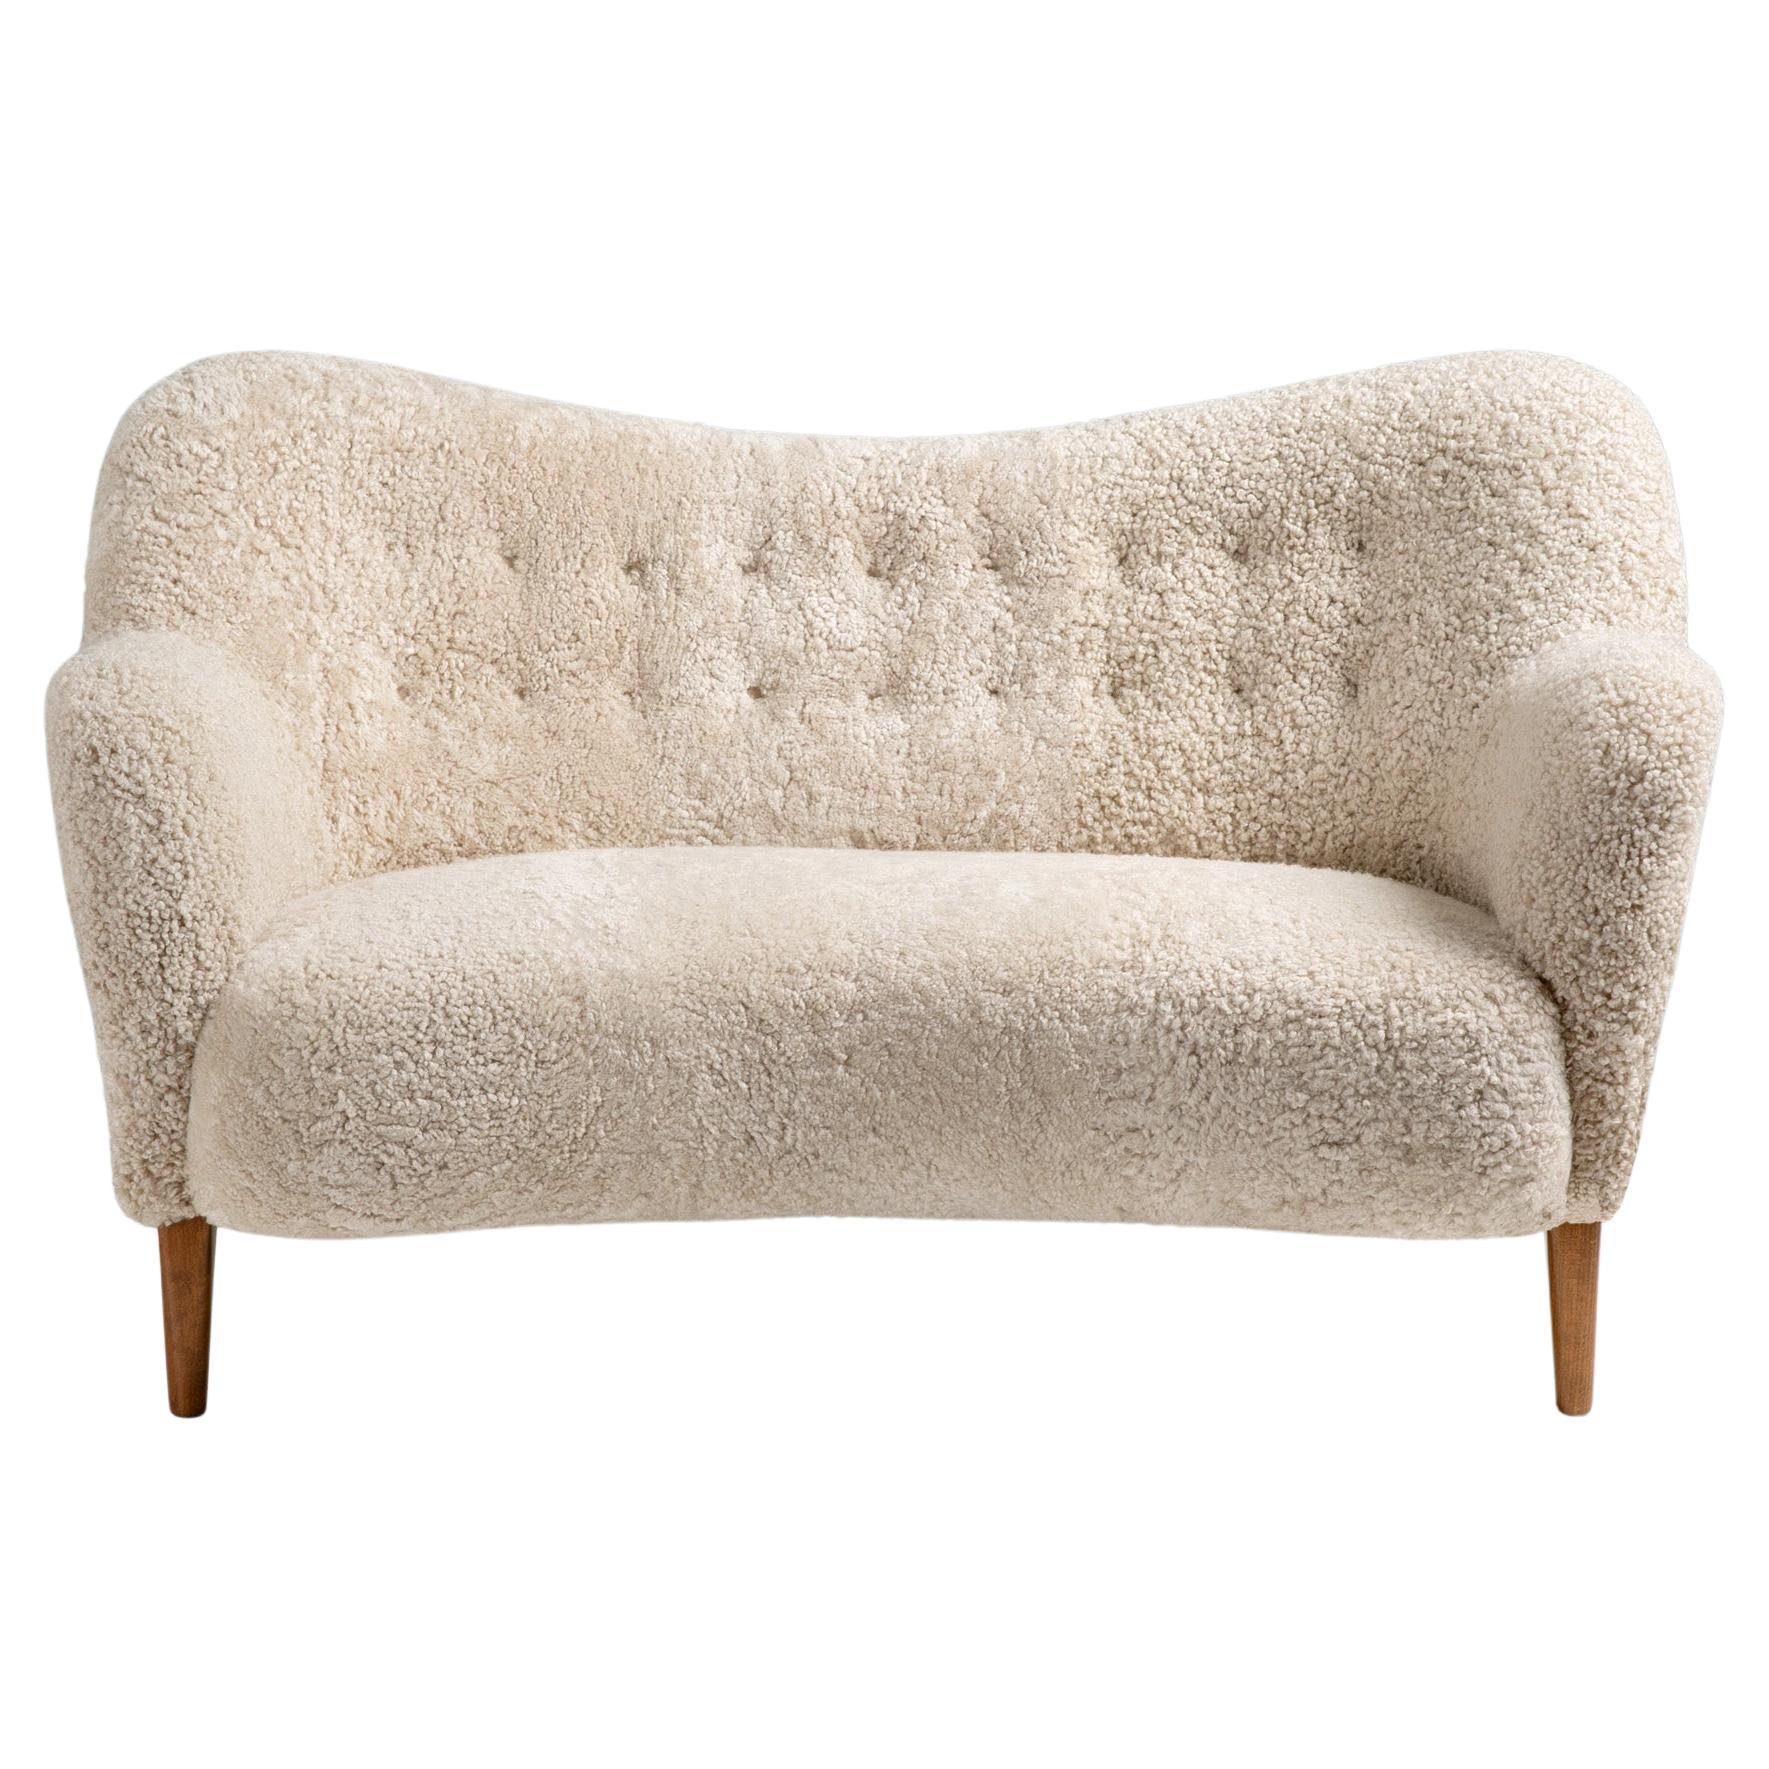 Custom Made Sheepskin Sofa by Alfred Kristensen. Available in COM upholstery For Sale